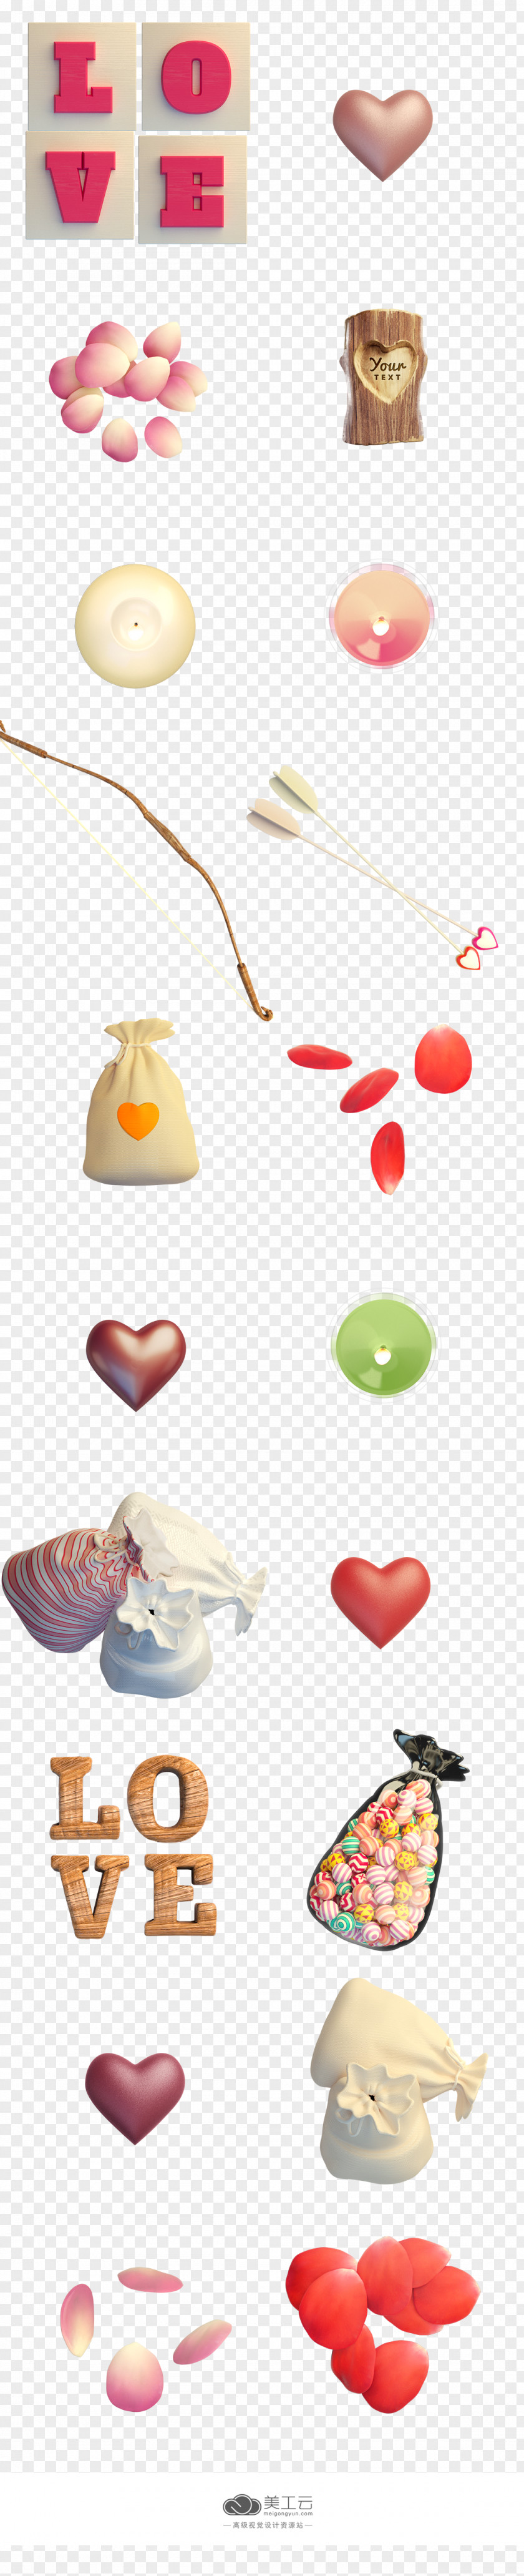 Valentine's Day Decorations Download Clip Art PNG